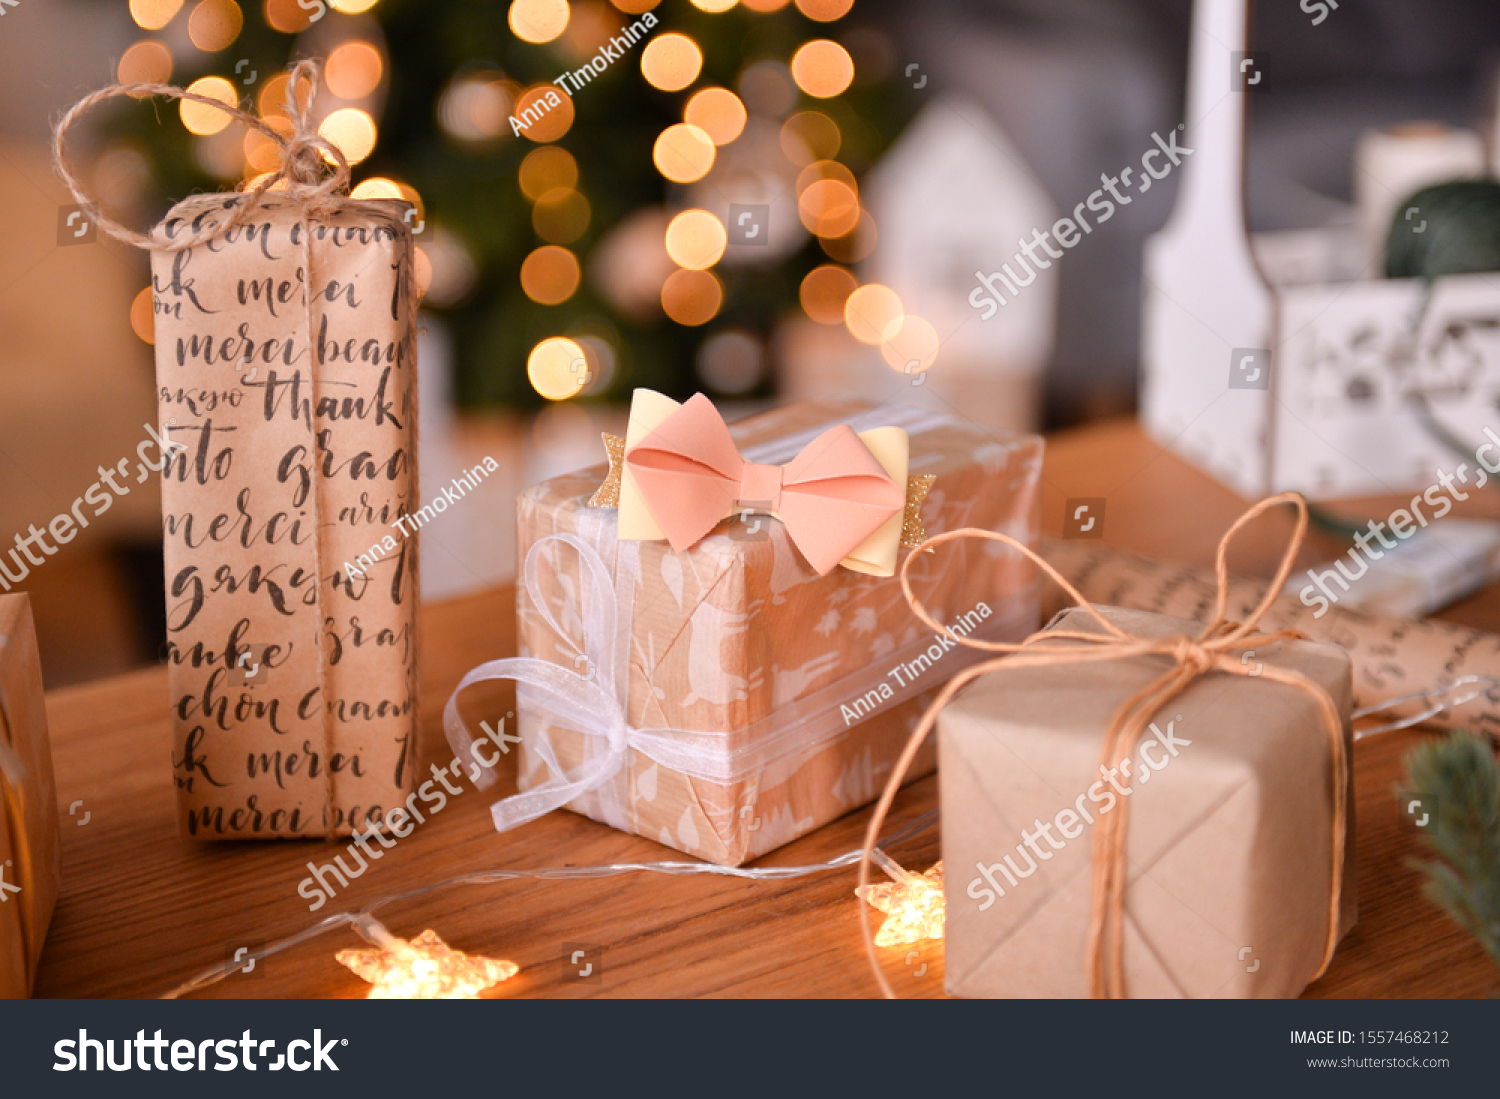 Christmas decorations ideas. Decorations for holiday party.  #1557468212